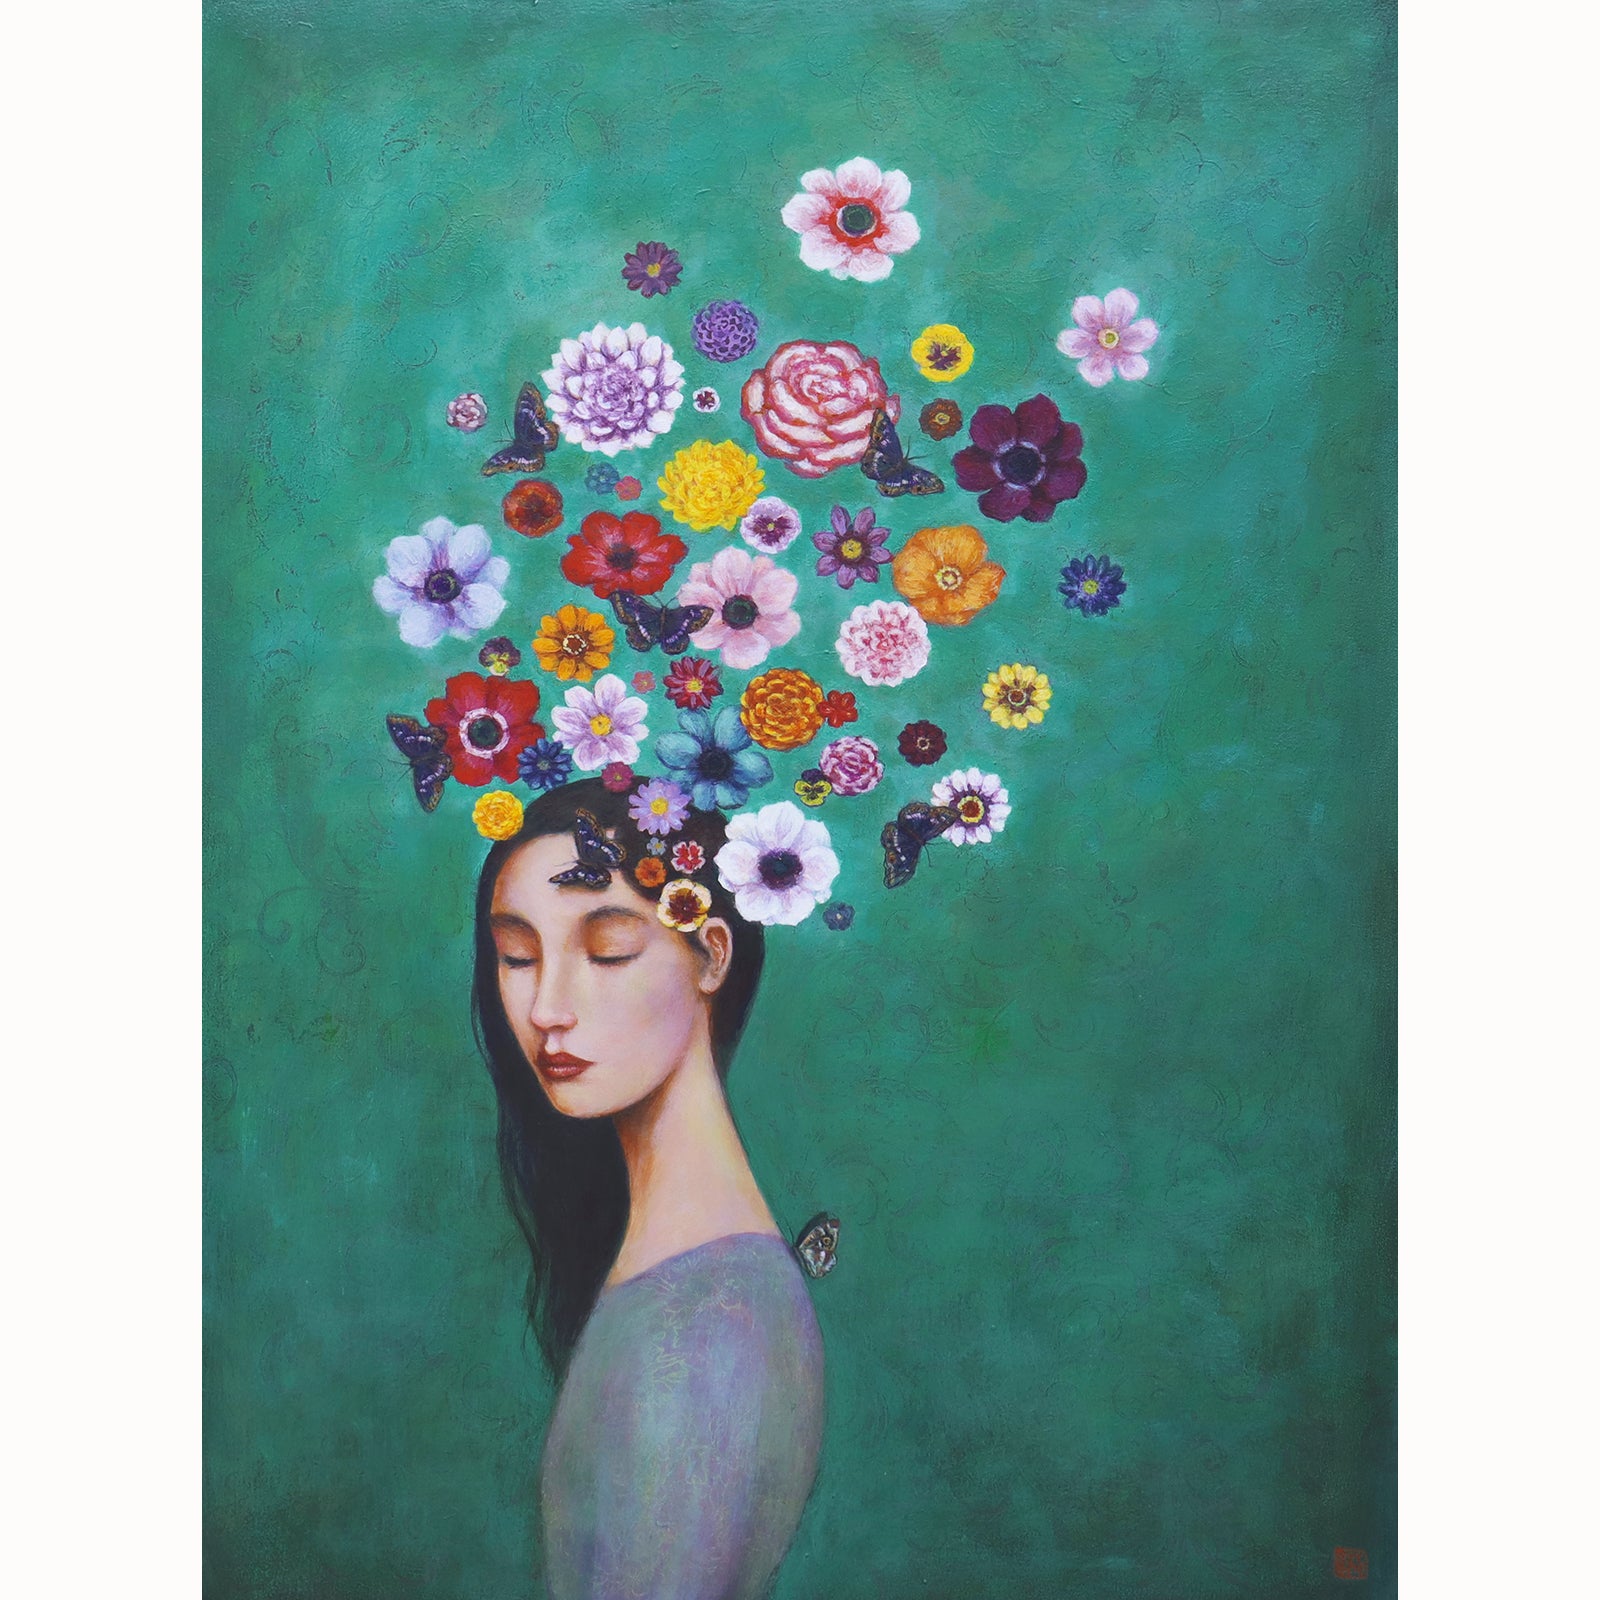 Artist Duy Huynh 's painting called "Windflower Reverie". A portrait of a woman with butterflies and flowers swirling around her head. Available at Lark & Key, Charlotte NC.